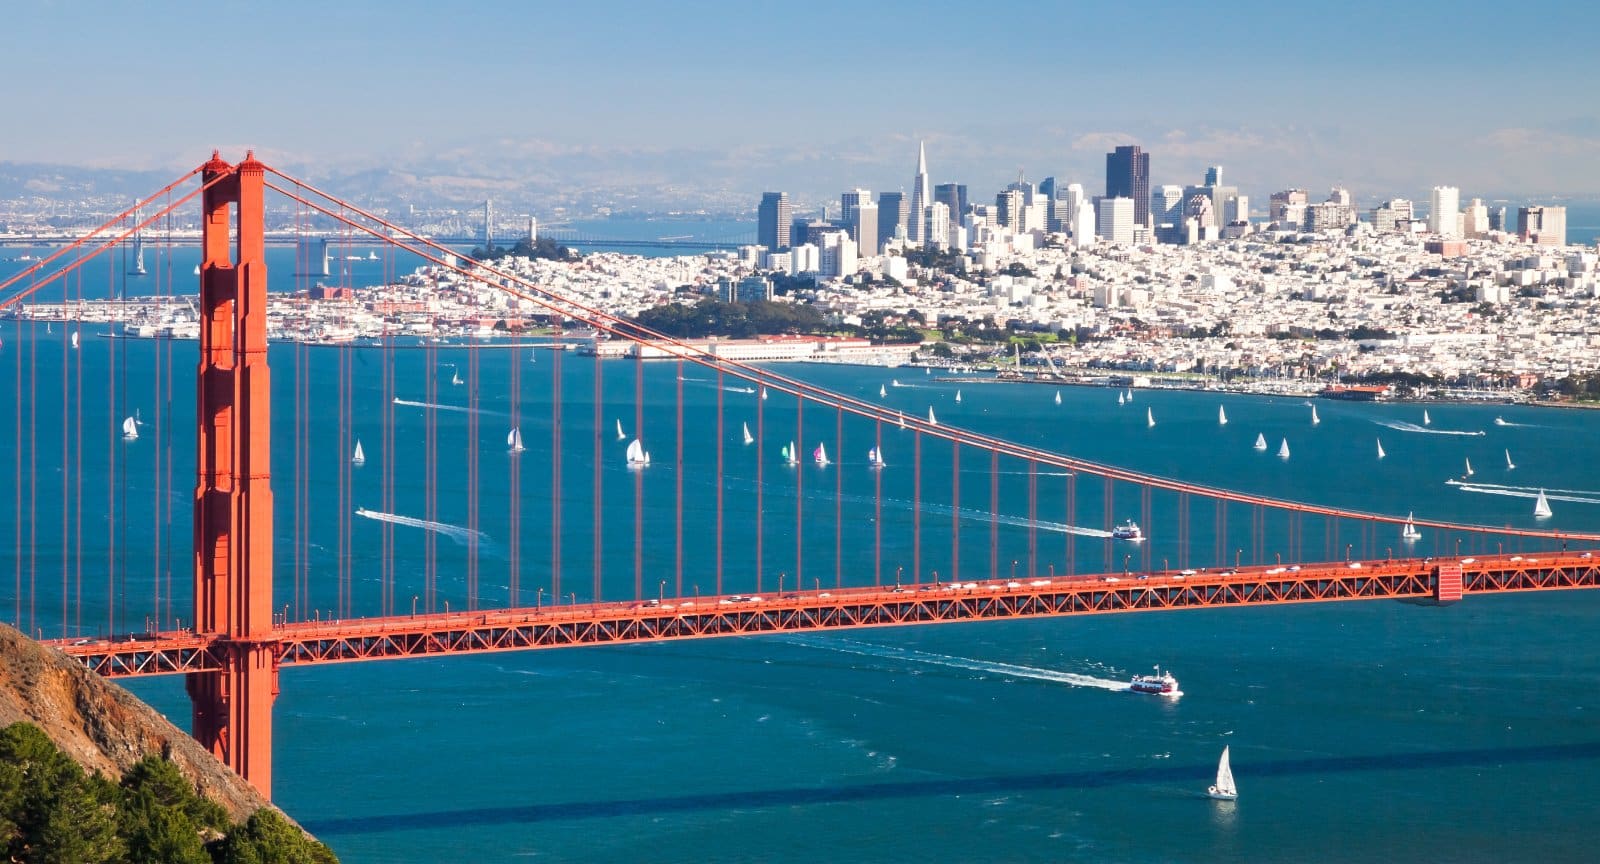 <p class="wp-caption-text">Image Credit: Shutterstock / kropic1</p>  <p><span>San Francisco, nestled along the Northern California coast, offers iconic landmarks, diverse neighborhoods, and culinary excellence. The Golden Gate Bridge, Alcatraz Island, and the historic cable cars are just a few of the attractions that define the city’s landscape. San Francisco’s neighborhoods, from the bustling Chinatown to the colorful Mission District, offer various cultural experiences, while the city’s commitment to culinary innovation is evident in its thriving restaurant scene. The surrounding Bay Area provides a natural playground, with Muir Woods National Monument and Point Reyes National Seashore offering escapes into Northern California’s stunning natural beauty.</span></p>